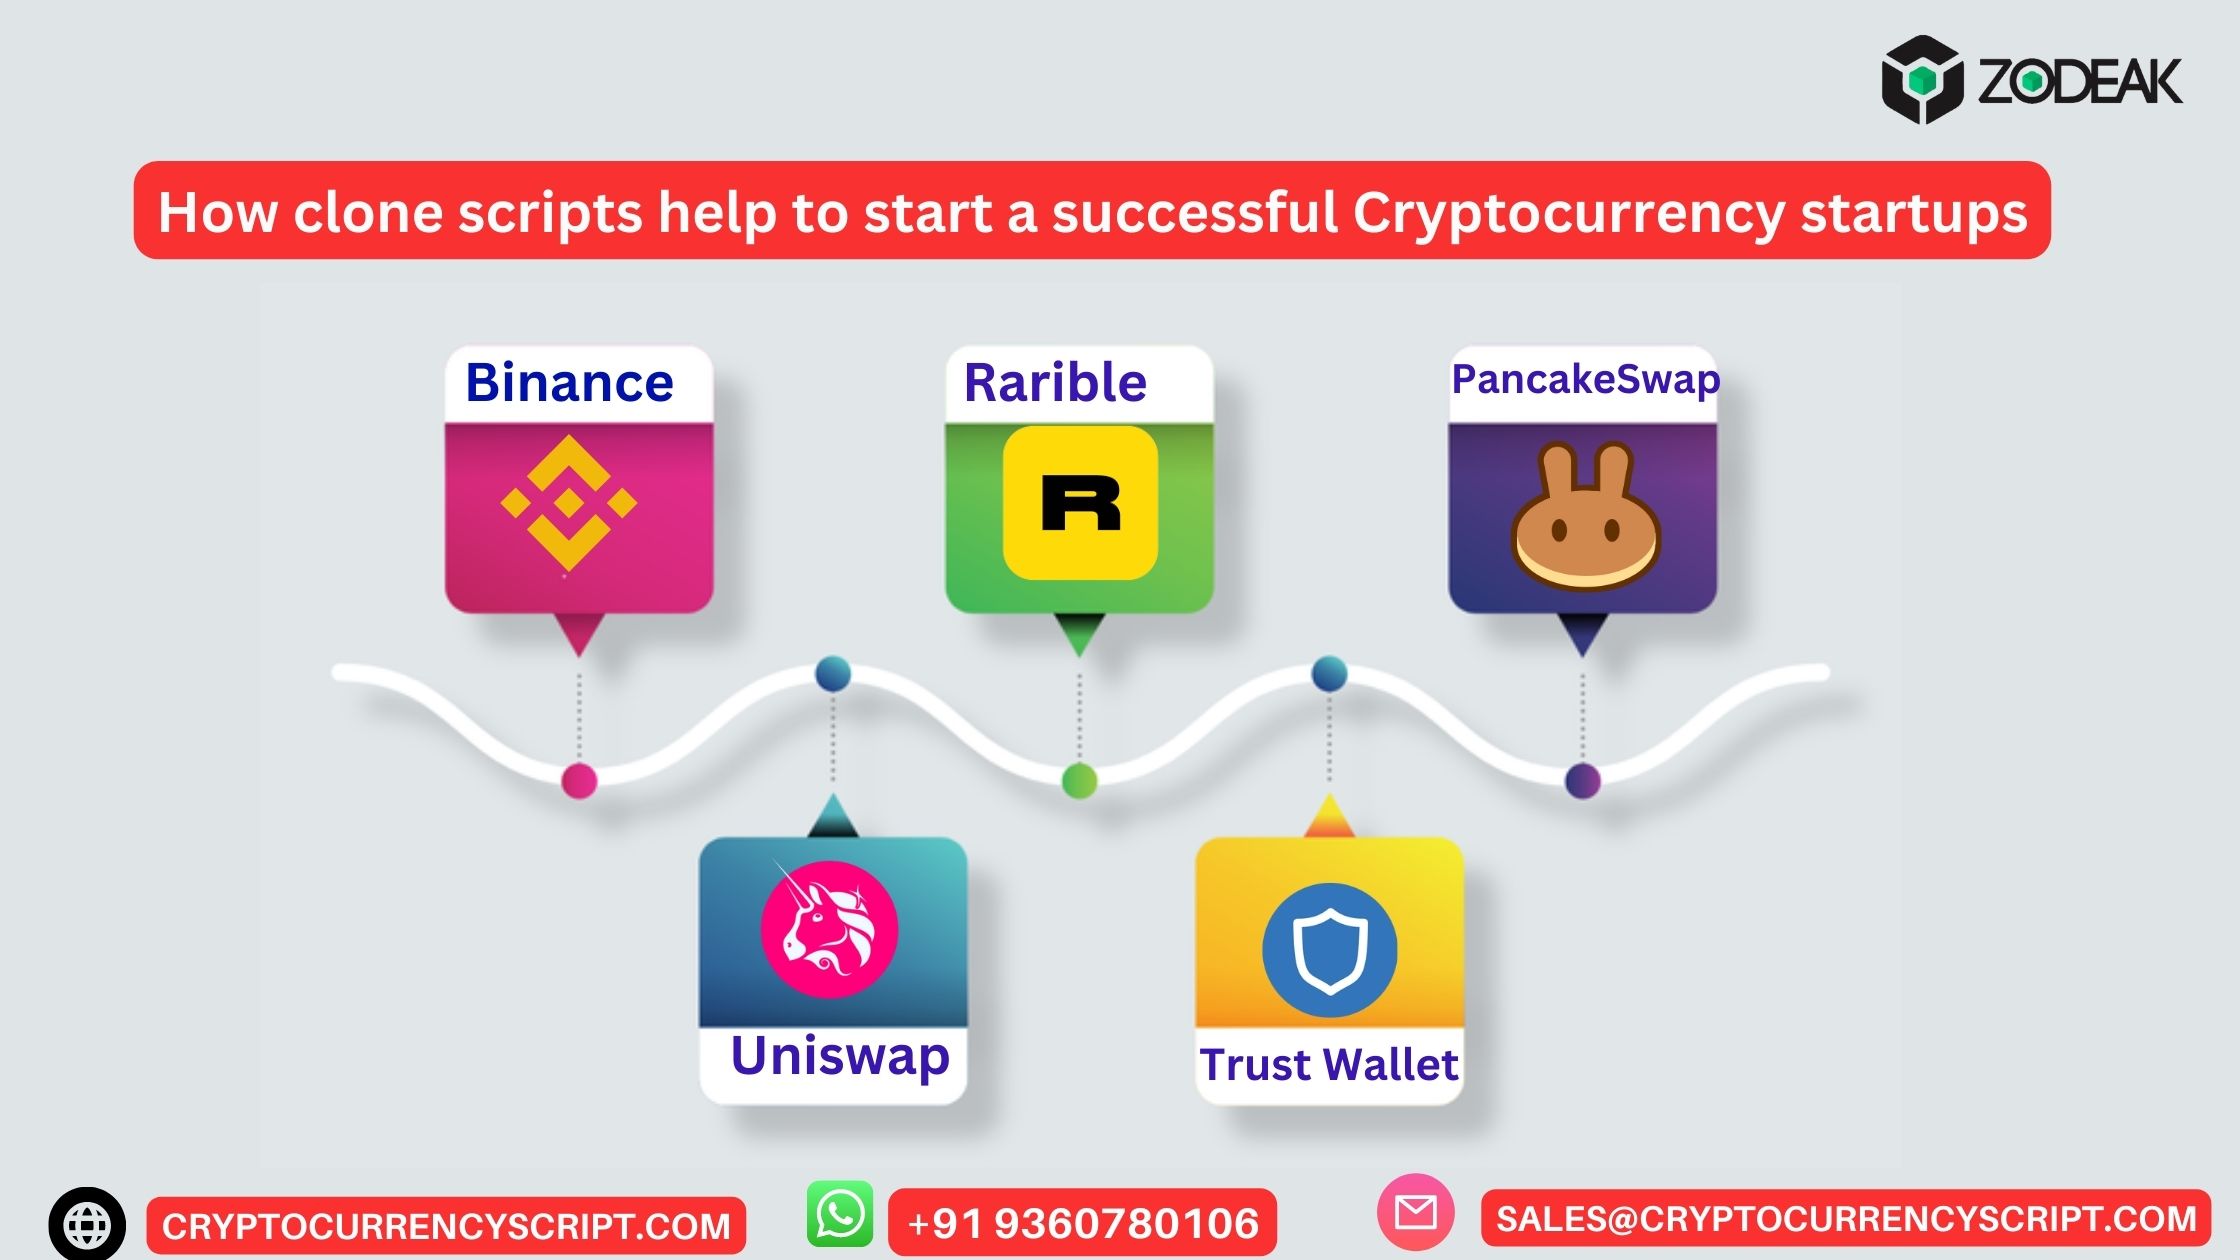 How clone scripts help to start a successful Cryptocurrency startups